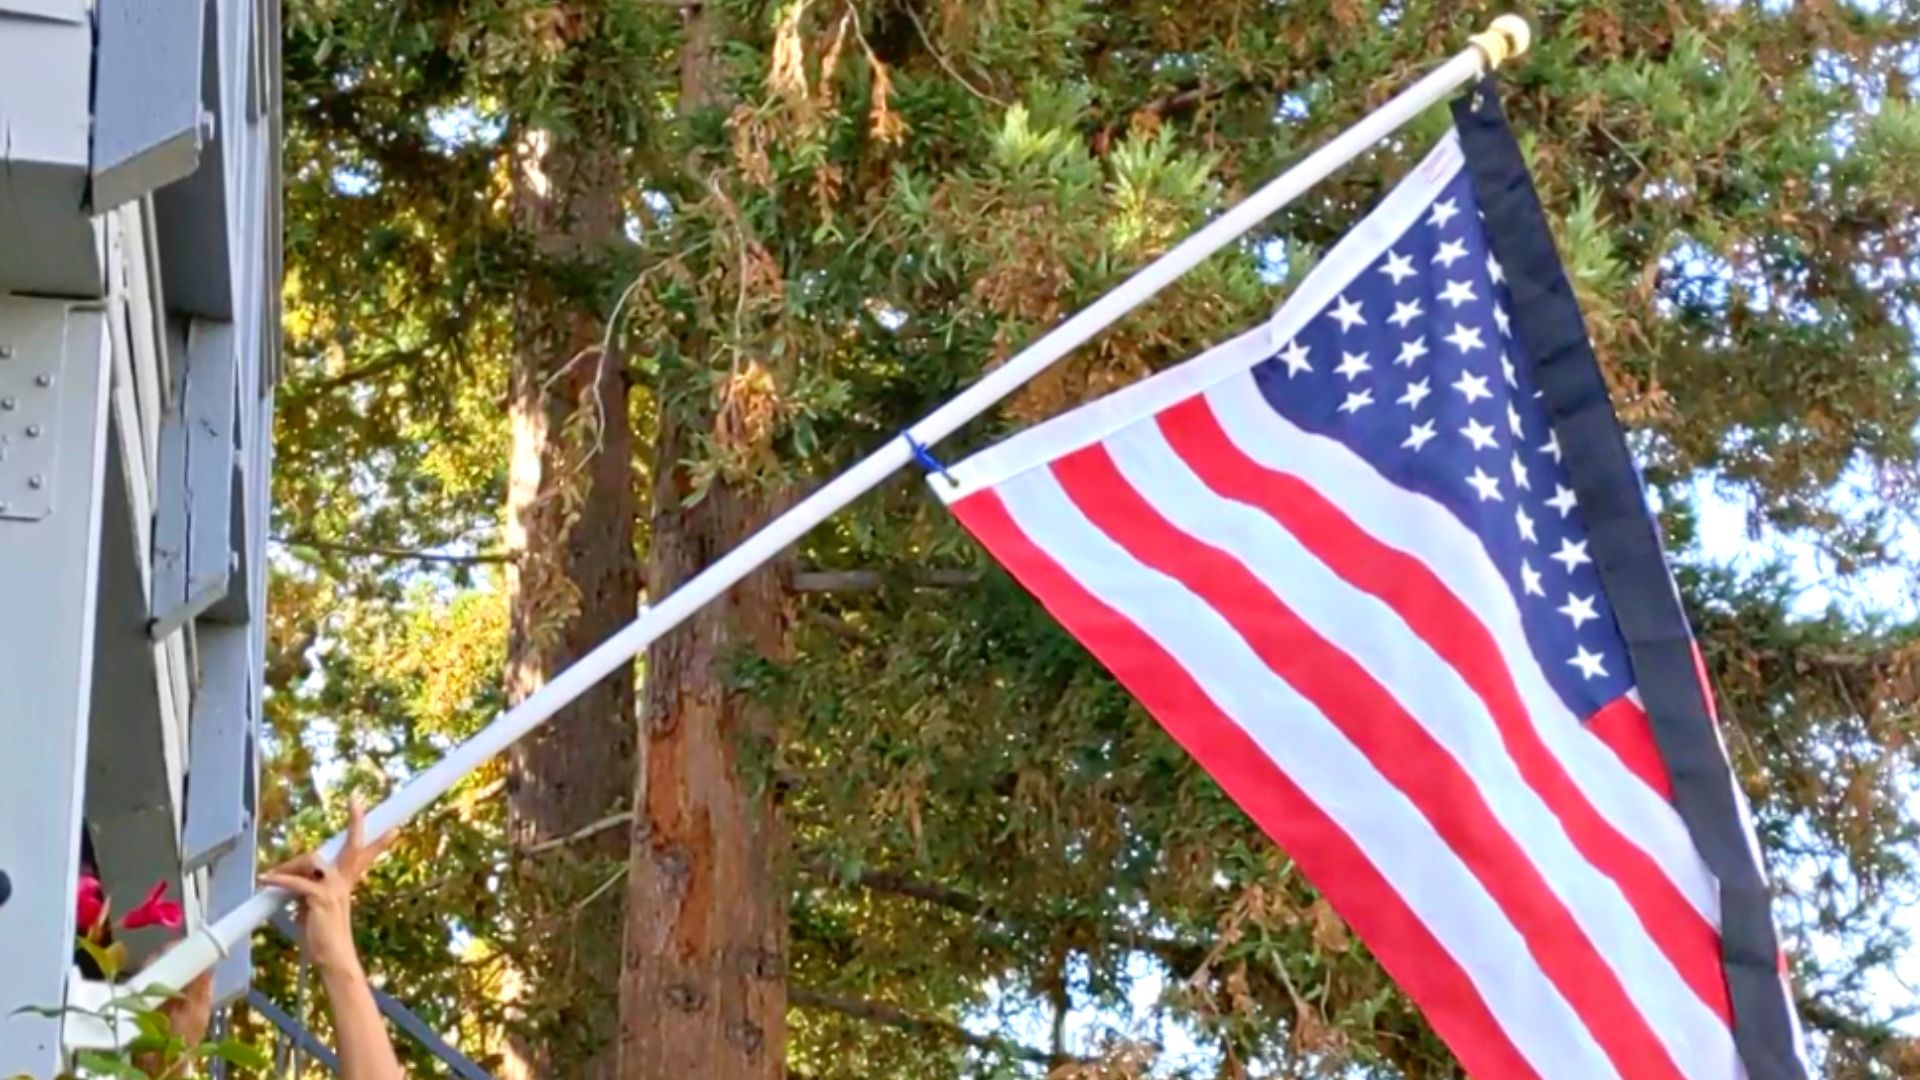 How To Fly The American Flag Half-Staff at Home